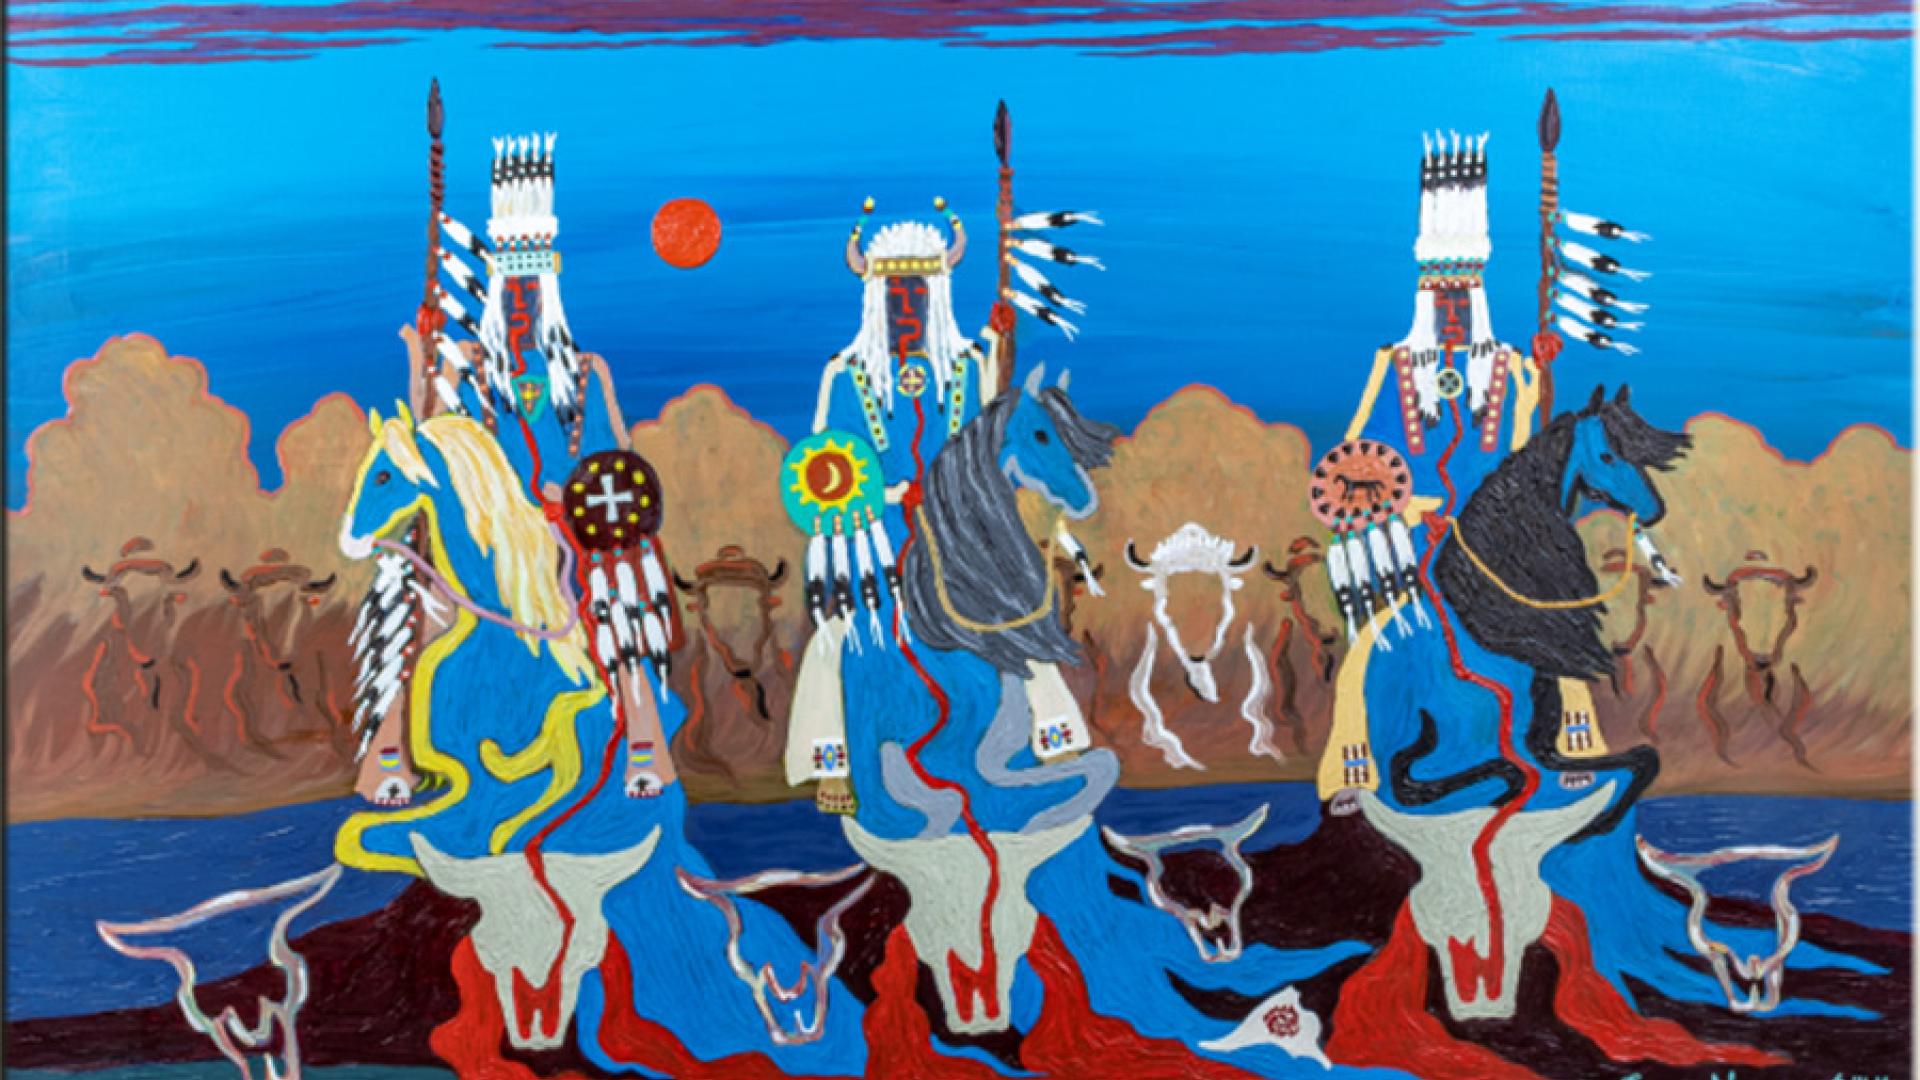 A painting of three horseback riding men in regalia approaching the viewer on a bright blue background.